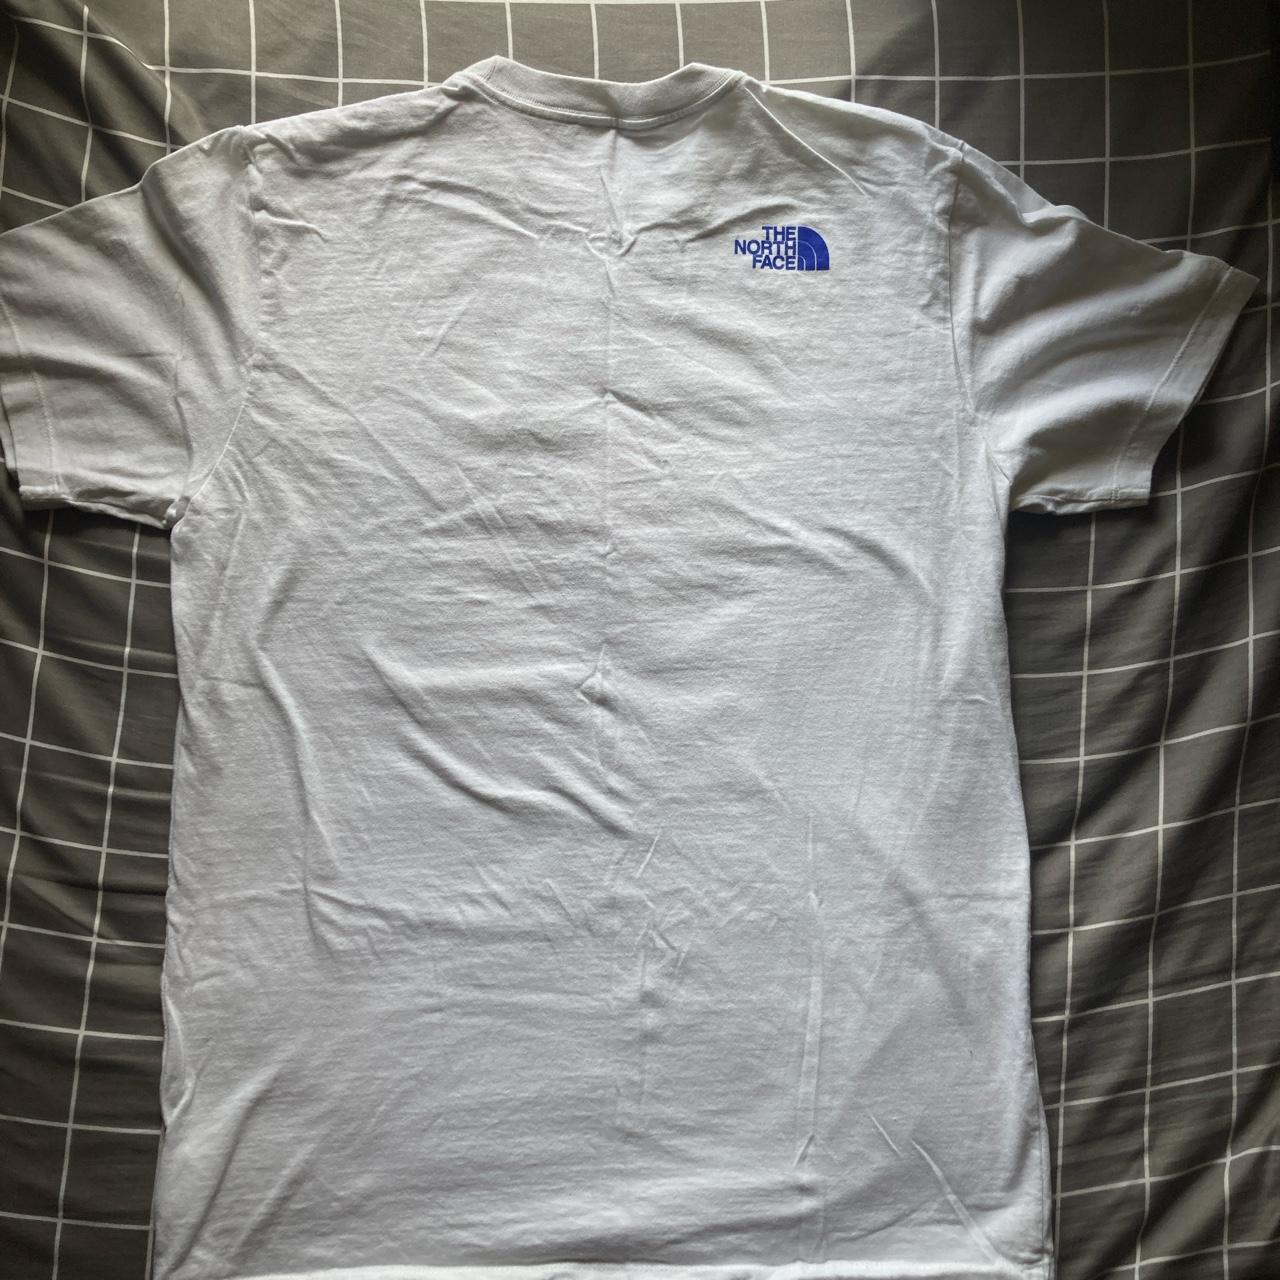 The North Face Men's White and Red T-shirt (2)